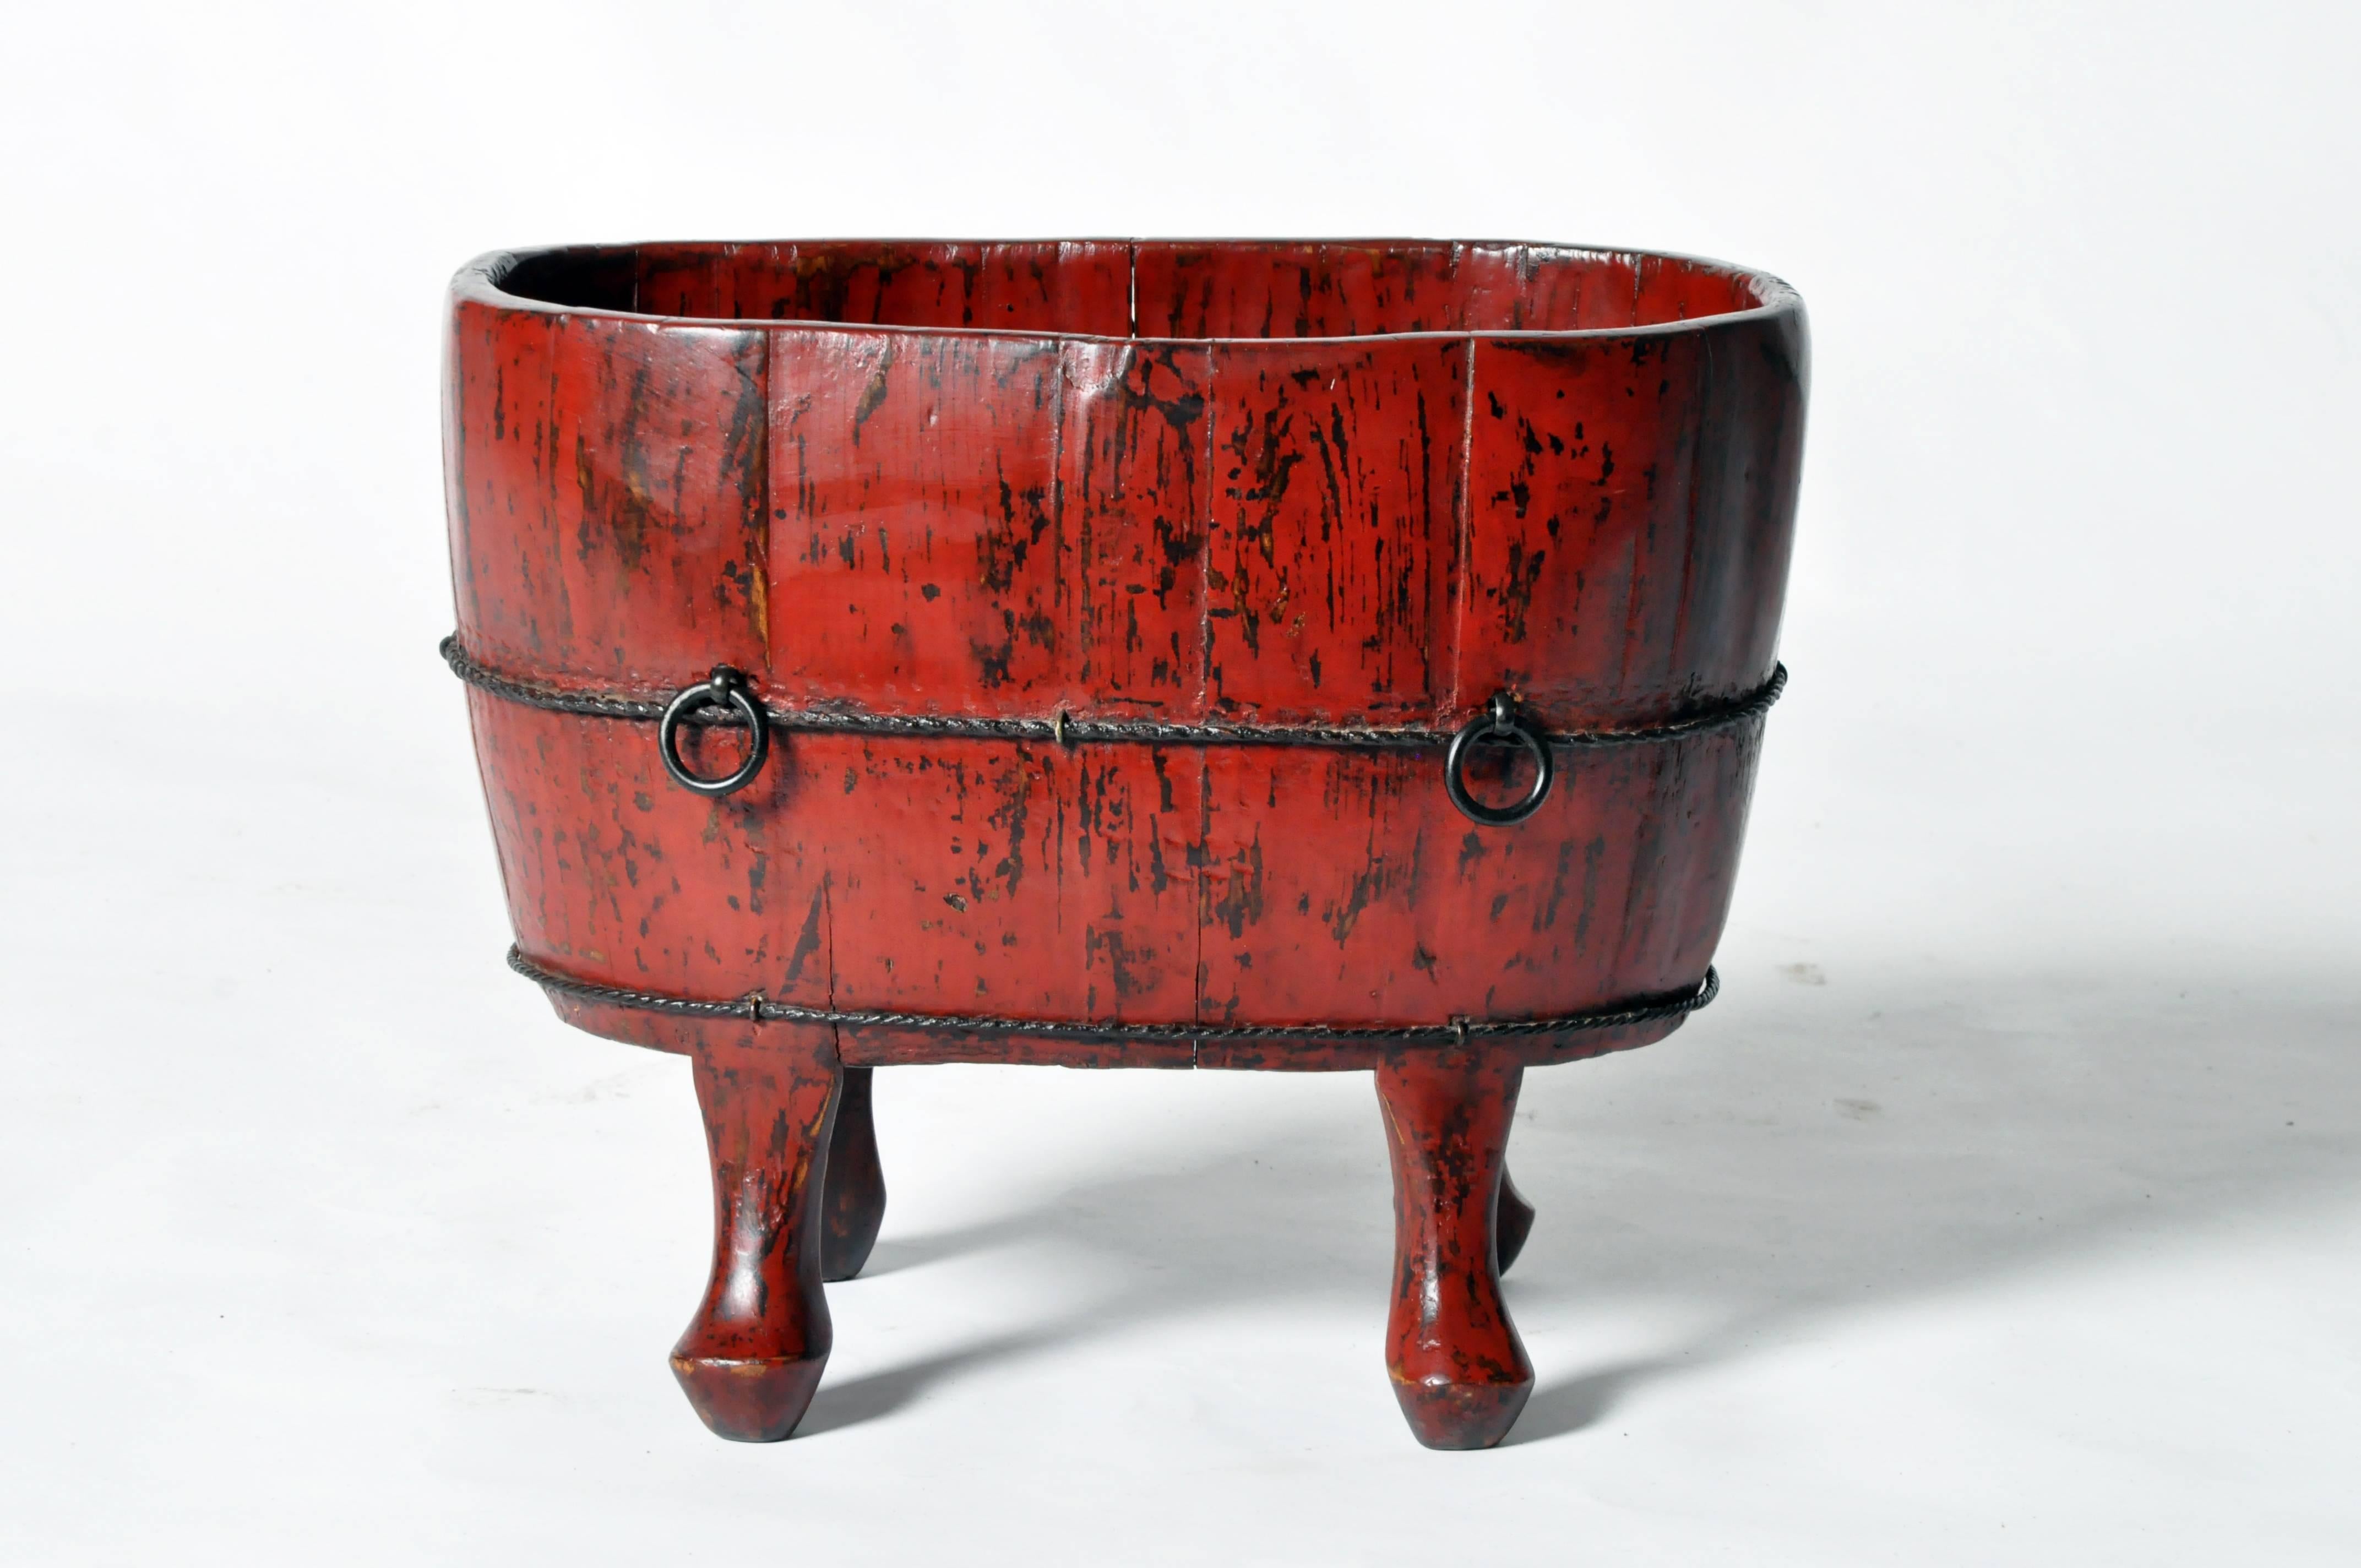 This Chinese pot is from Zhejiang, China and made from red lacquered softwood.